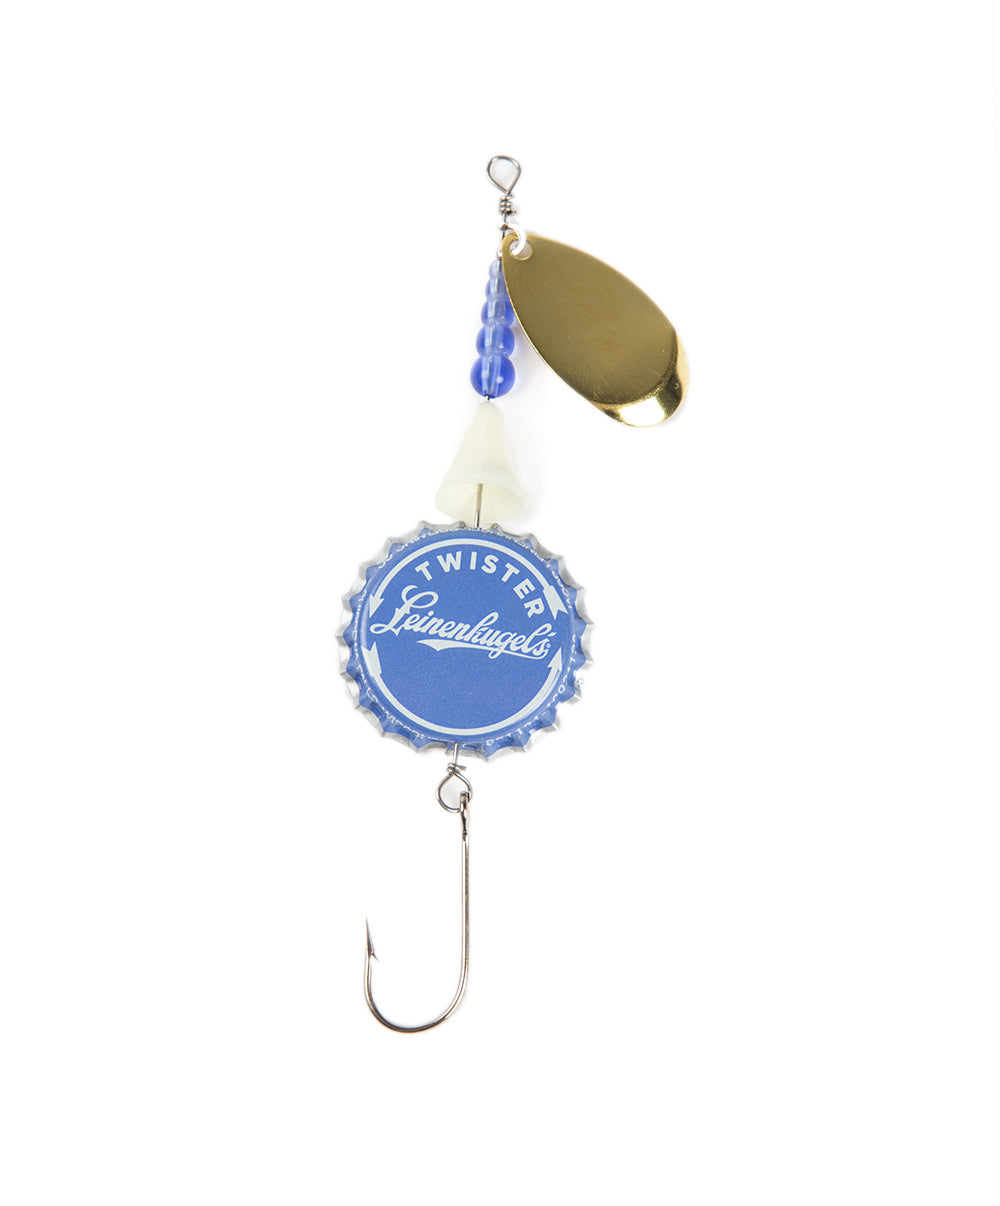 beer fishing lures, beer fishing lures Suppliers and Manufacturers at